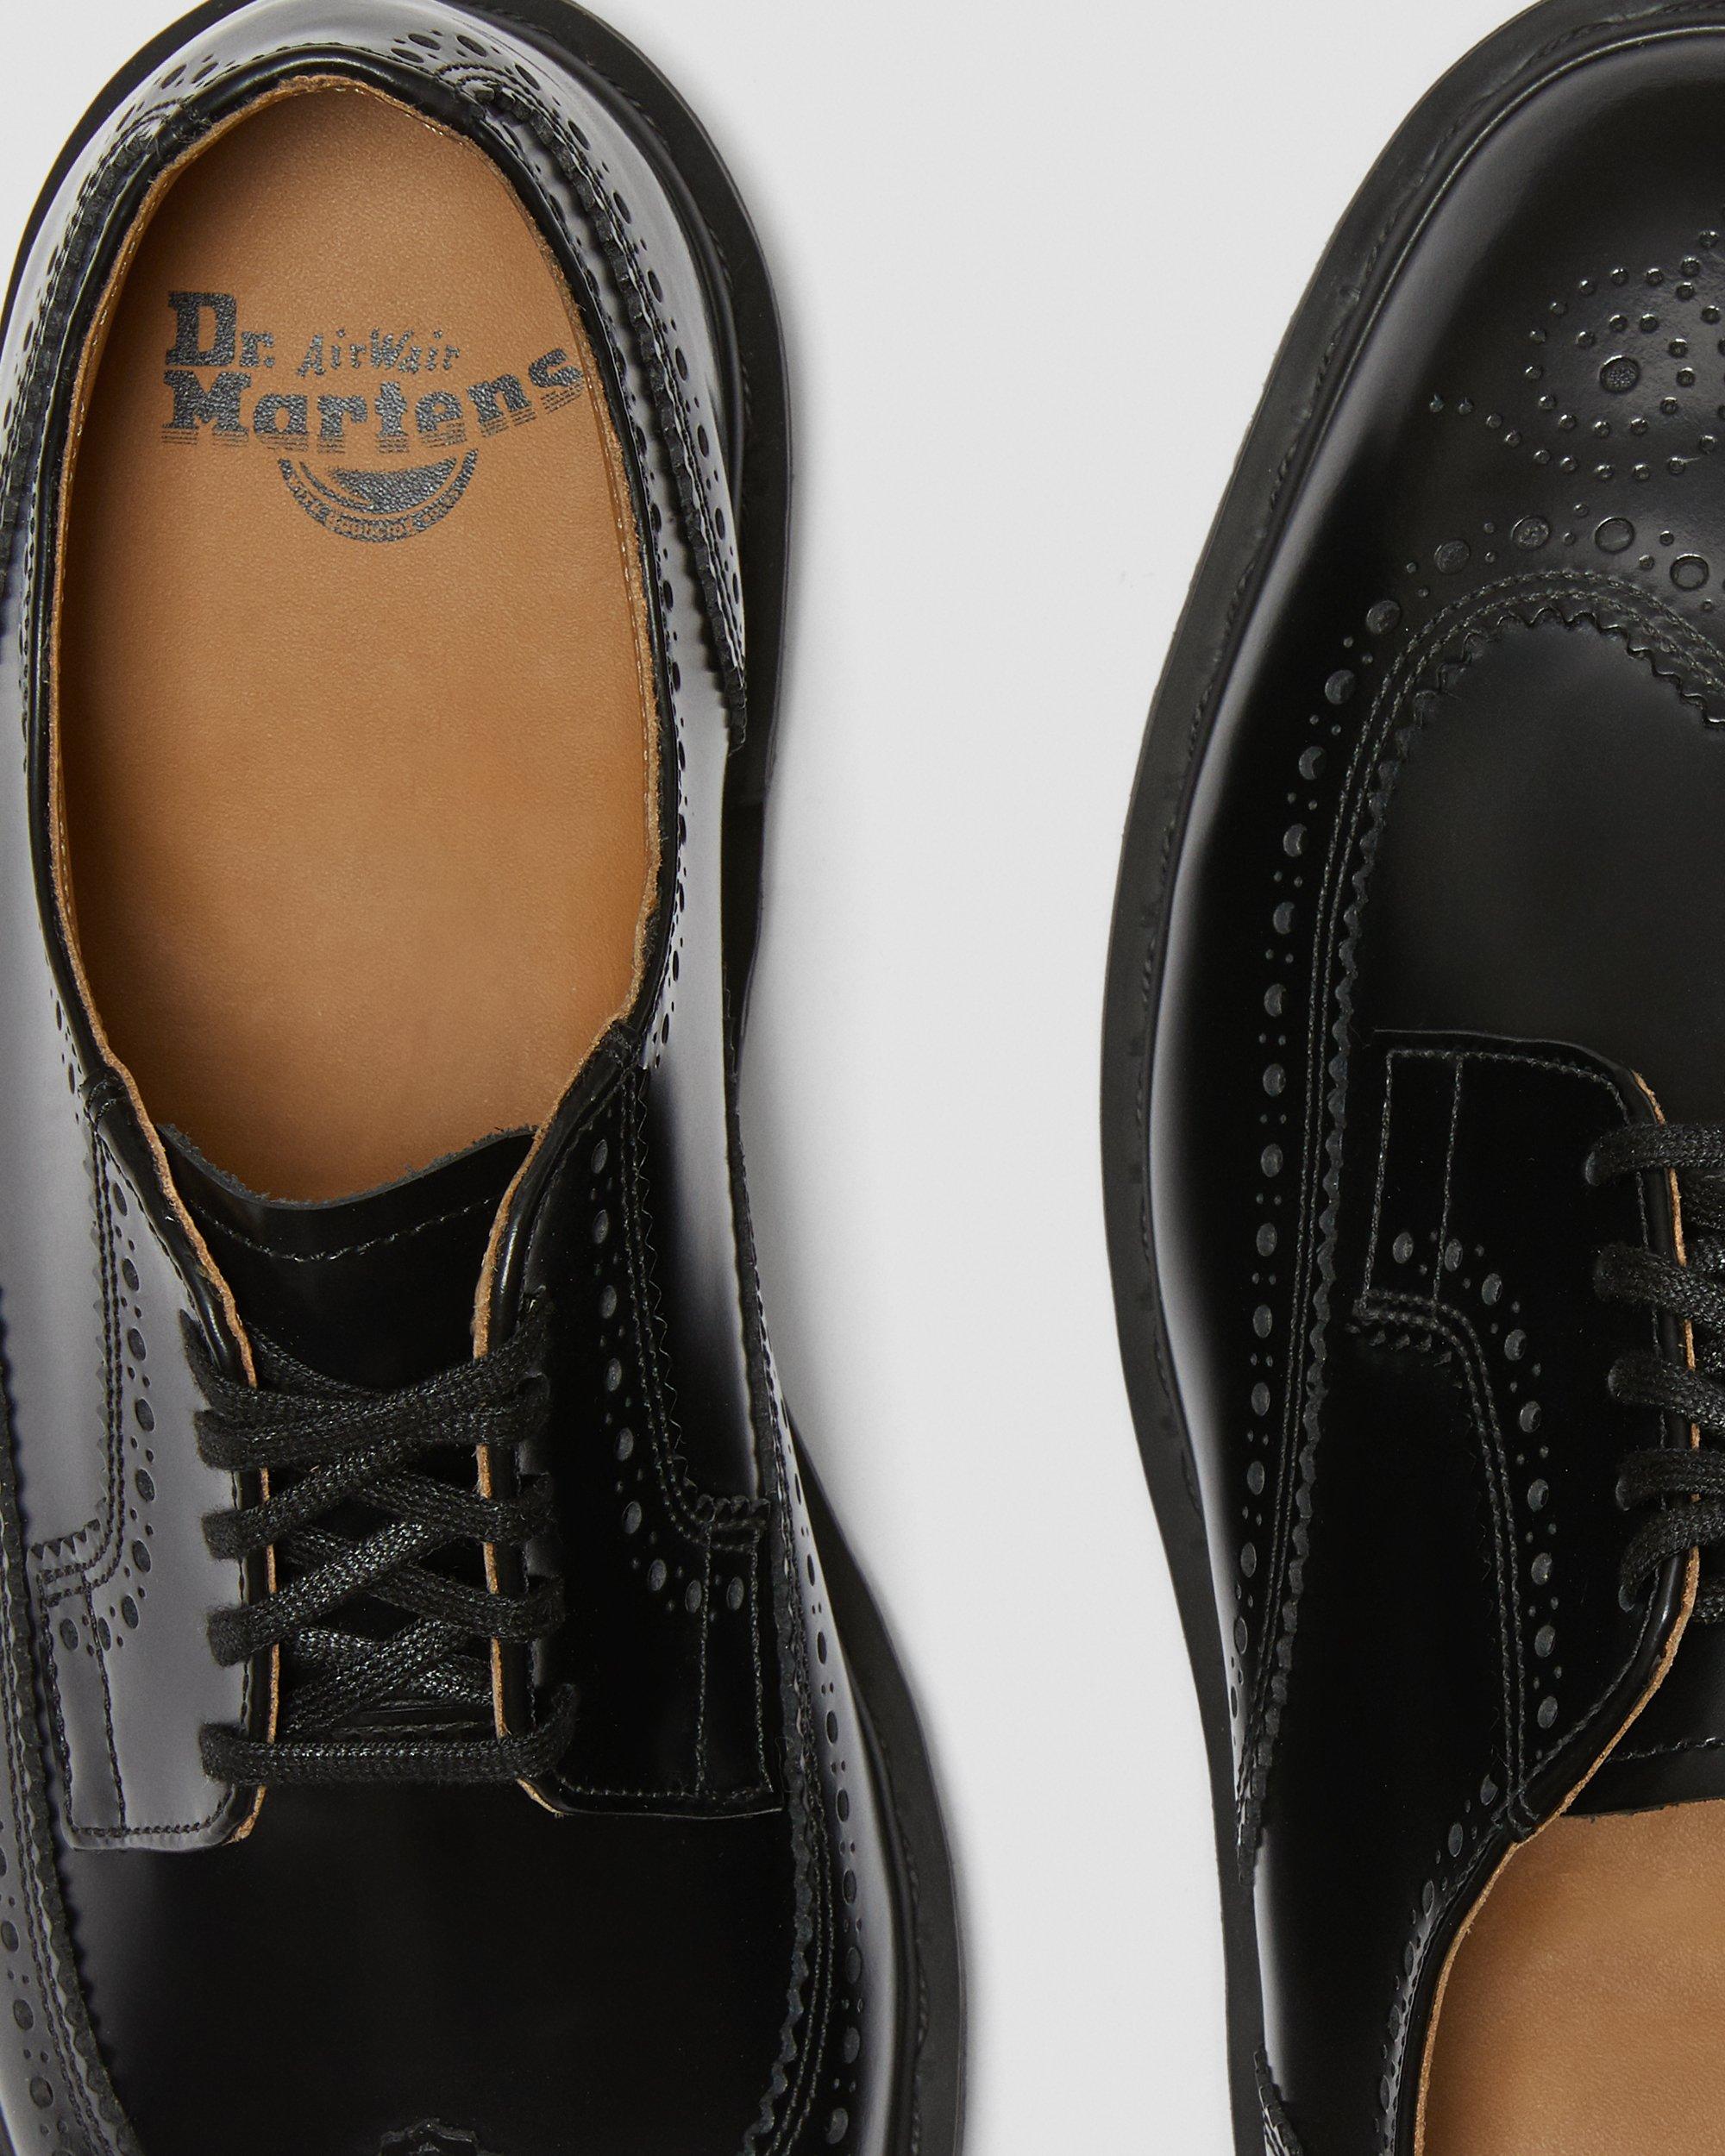 DR MARTENS KELVIN II SMOOTH LEATHER BROGUE SHOES